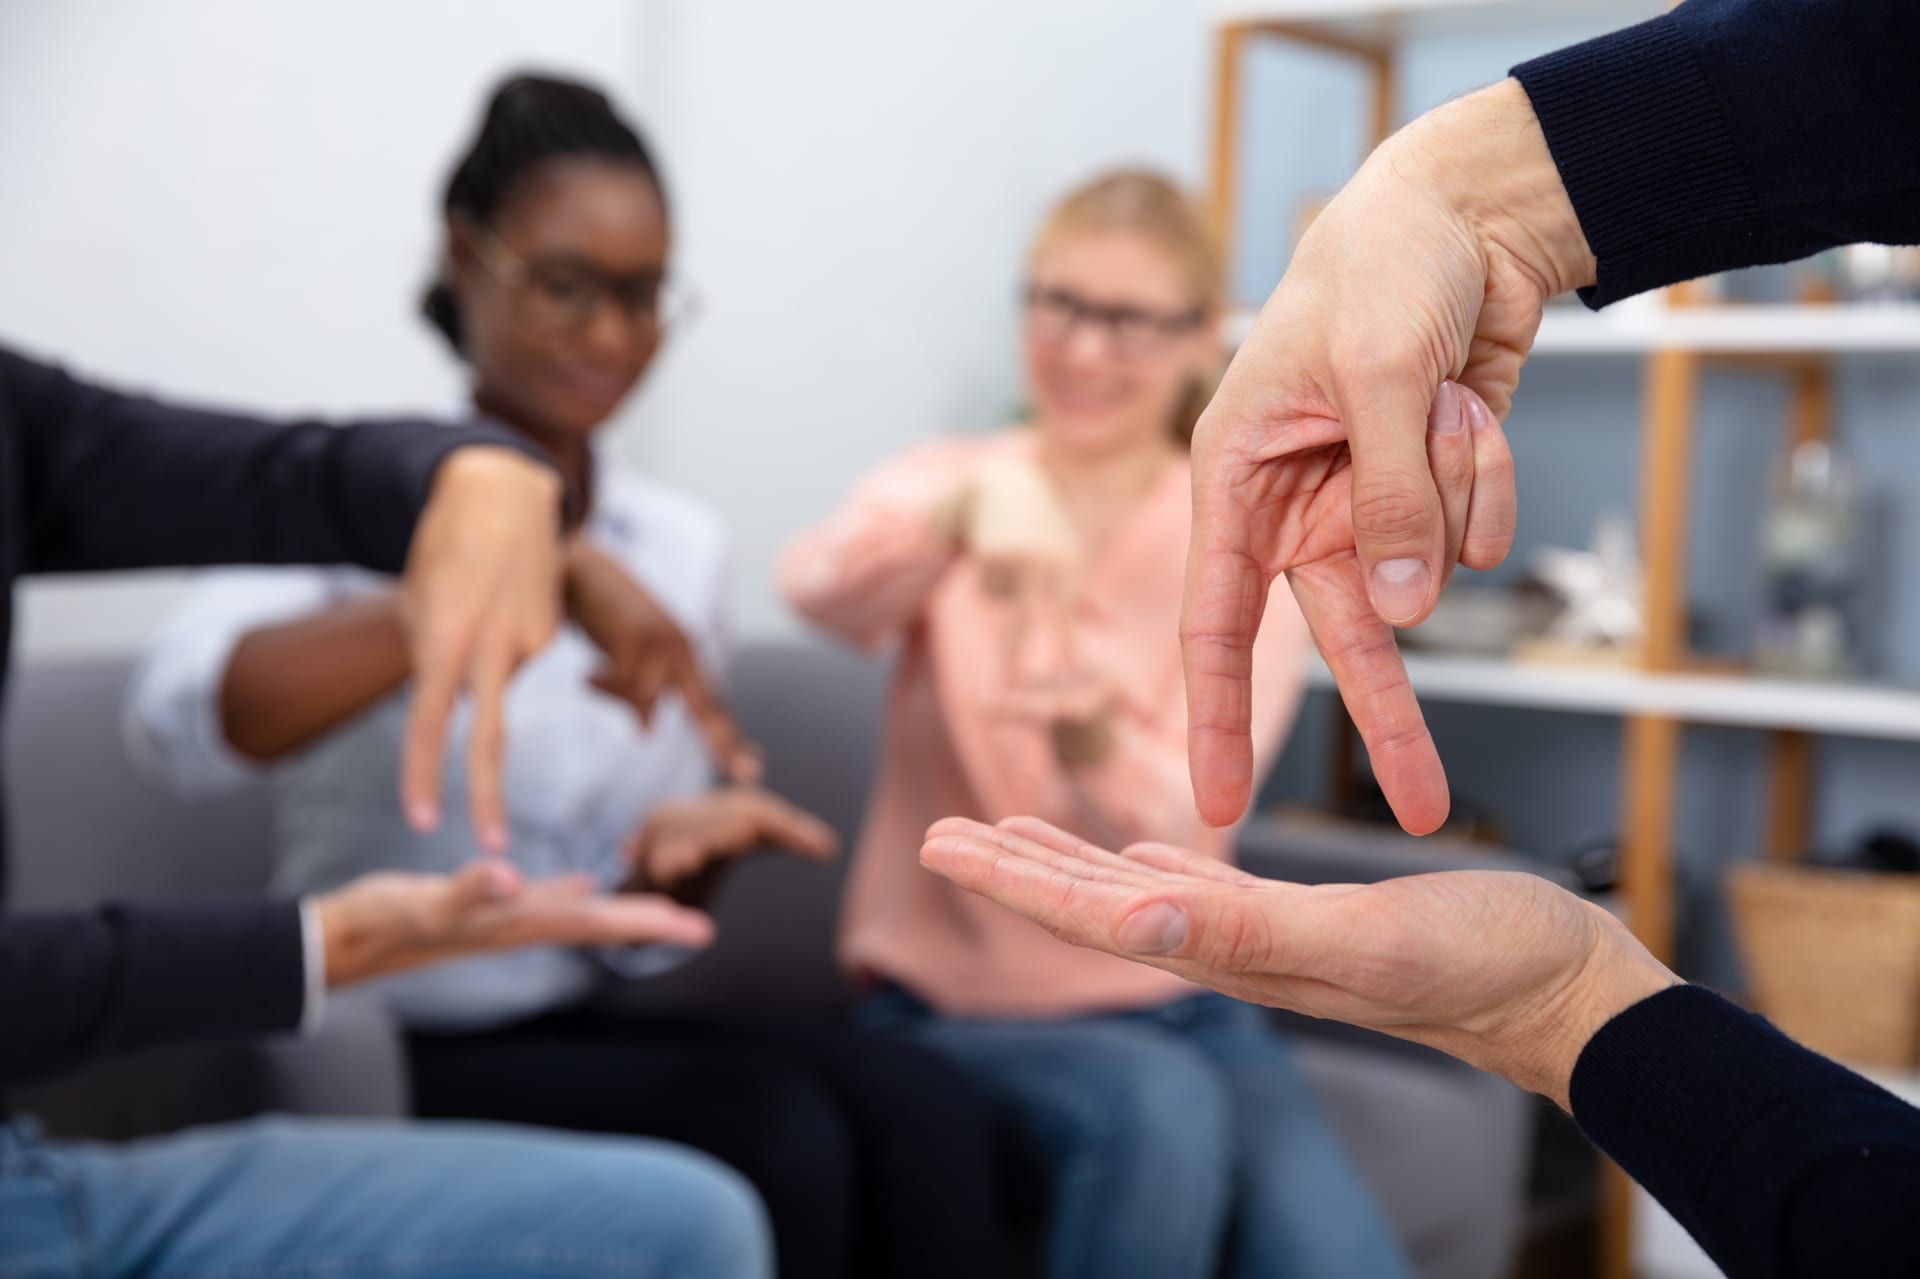 Group,Of,Multi,Ethnic,People,Communicating,With,Hand,Sign,Languages